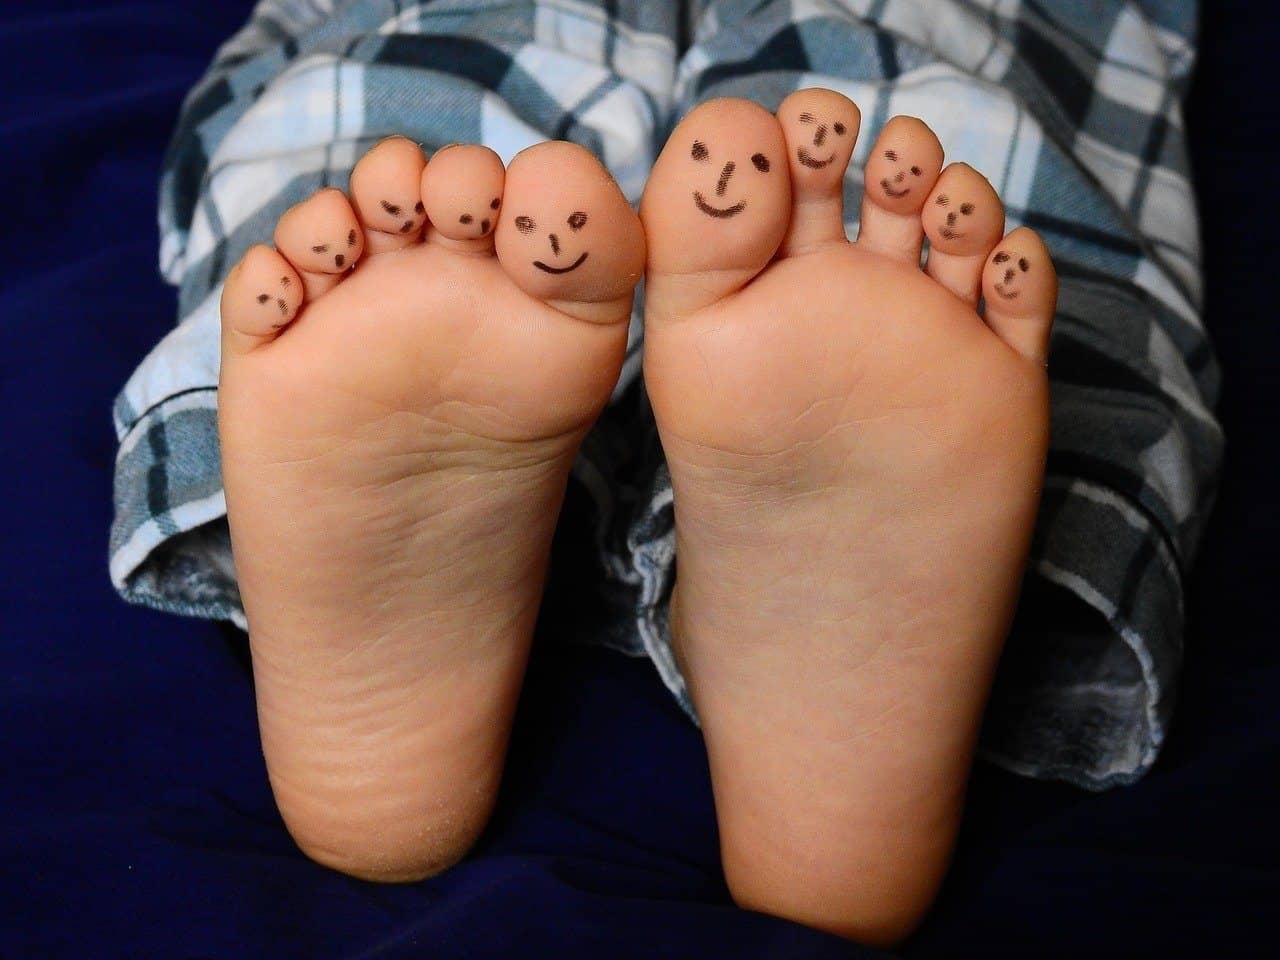 feet with smiley faces drawn on the toes